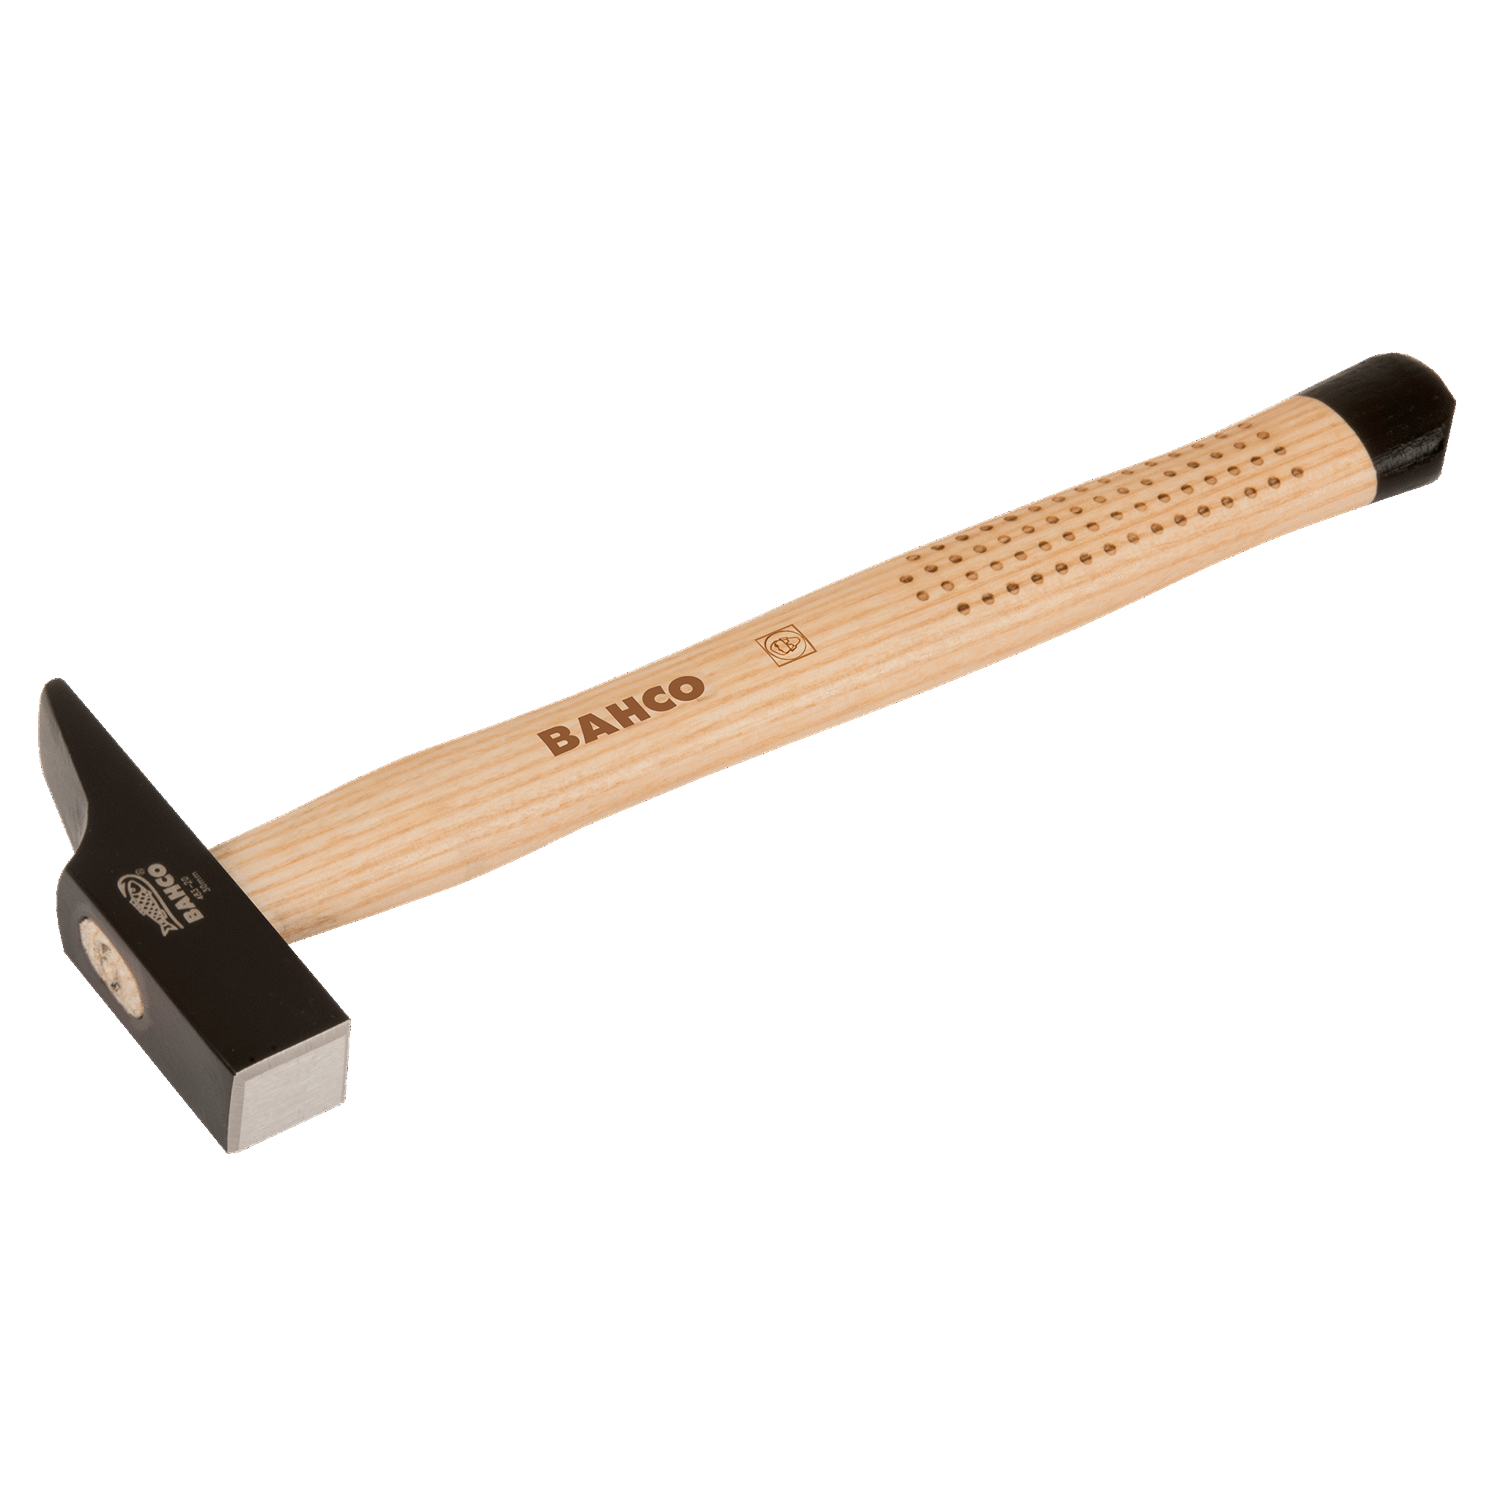 BAHCO 483 Joiner Hammer French Pattern (BAHCO Tools) - Premium Joiner Hammer from BAHCO - Shop now at Yew Aik.